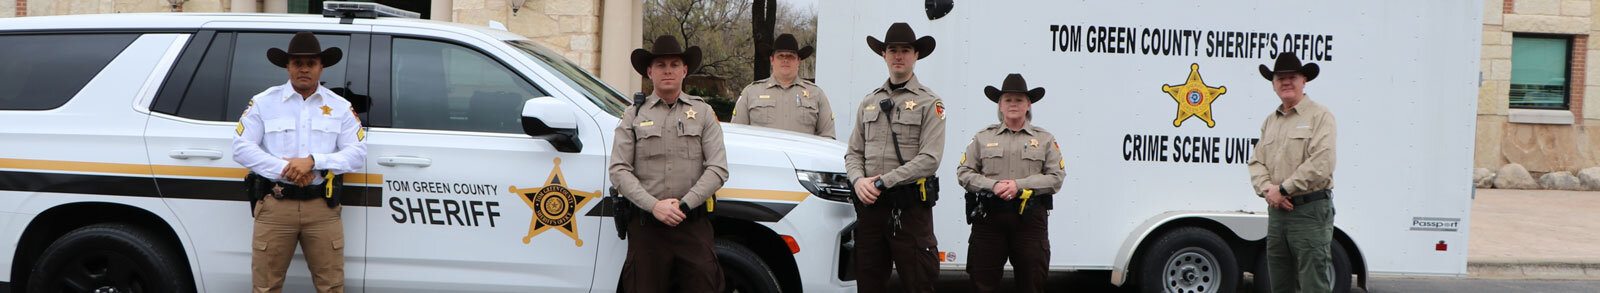 Tom Green County Sheriff Officers standing in front of vehicle and crime scene unit trailor